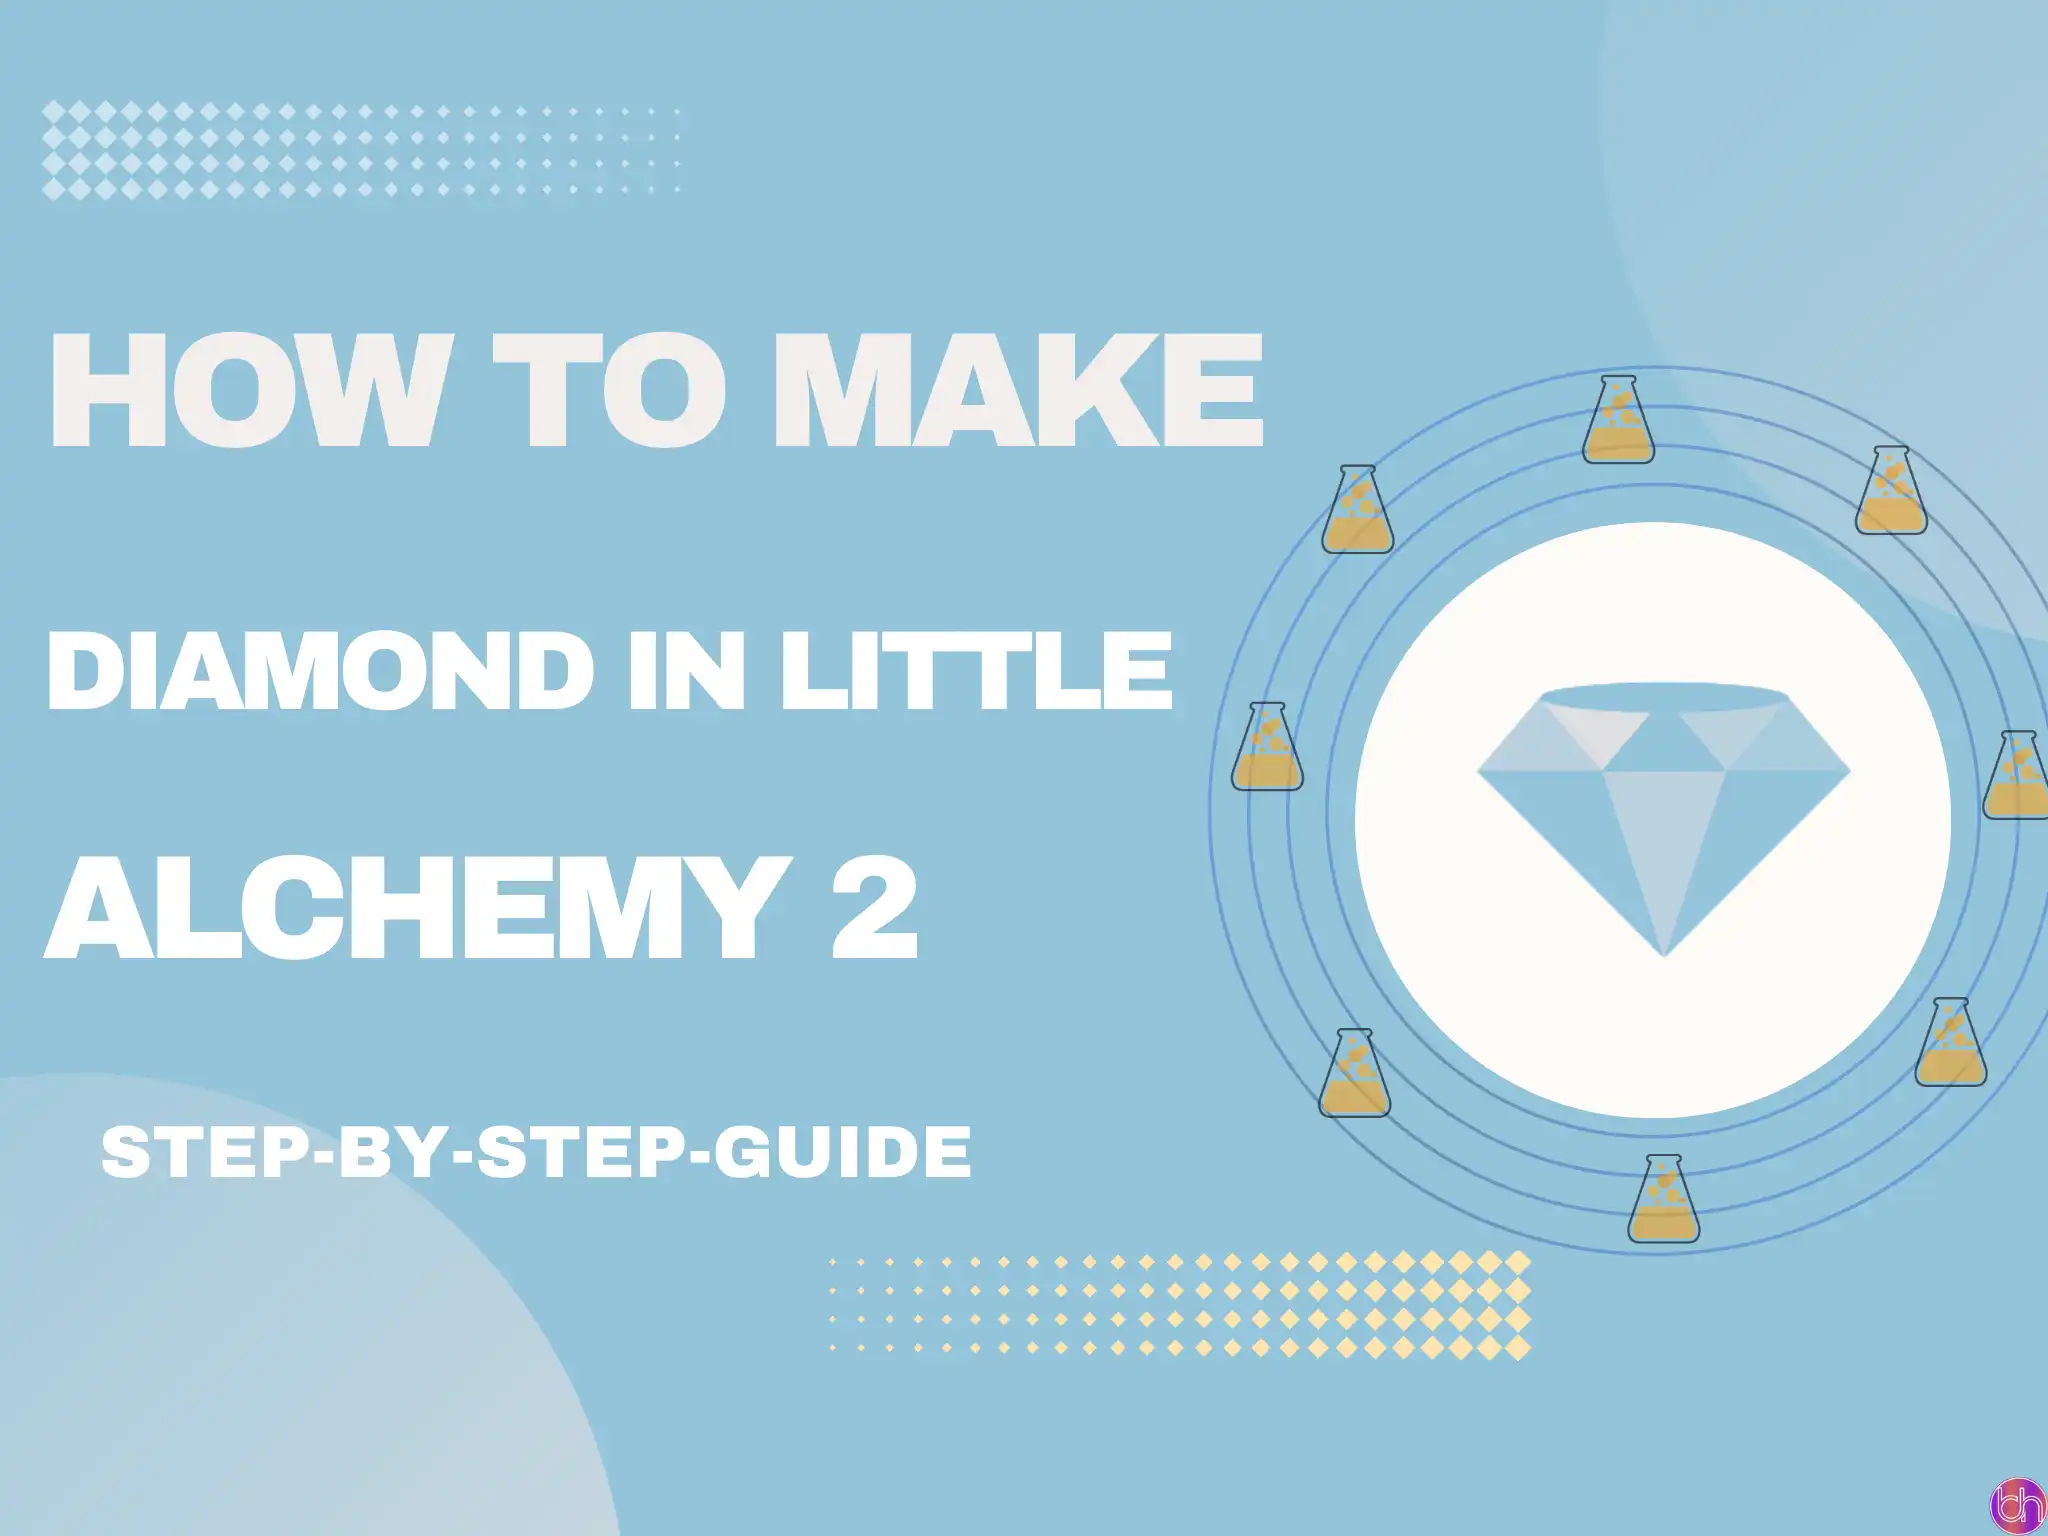 How to make Diamond in Little Alchemy 2